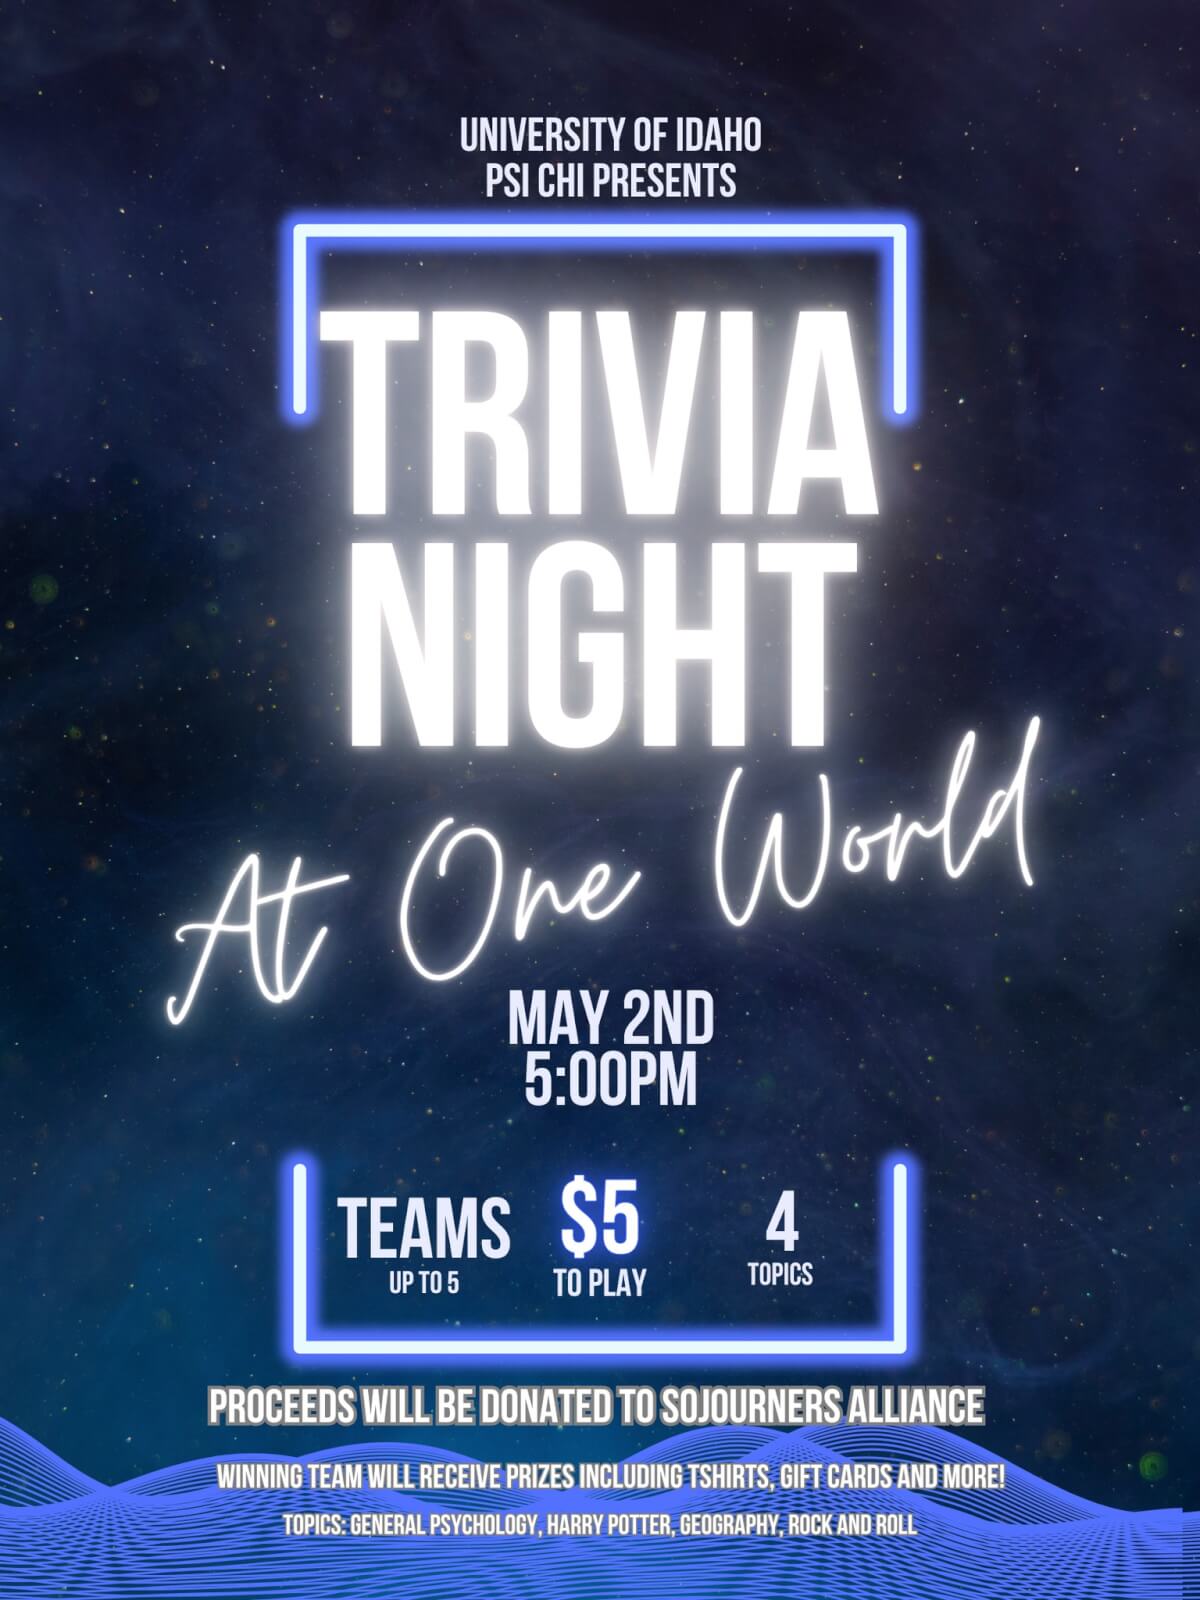 Trivia Night at One World Cafe